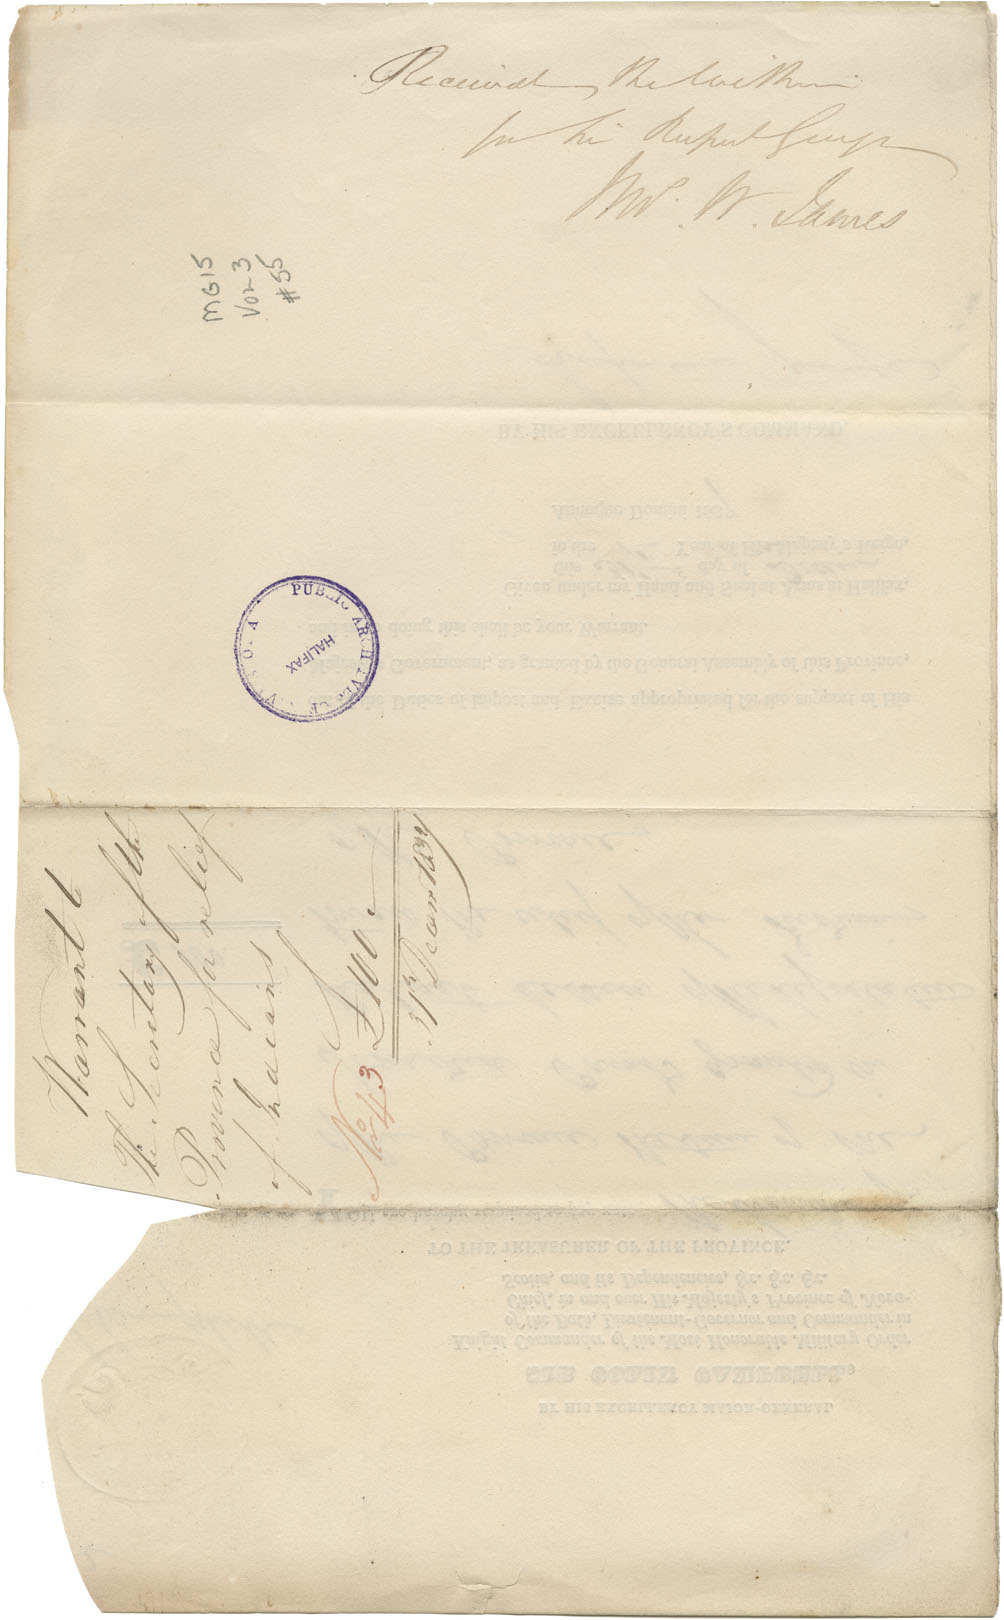 Warrant to the Provincial Secretary of £100-0-0 for Mi'kmaq relief. 